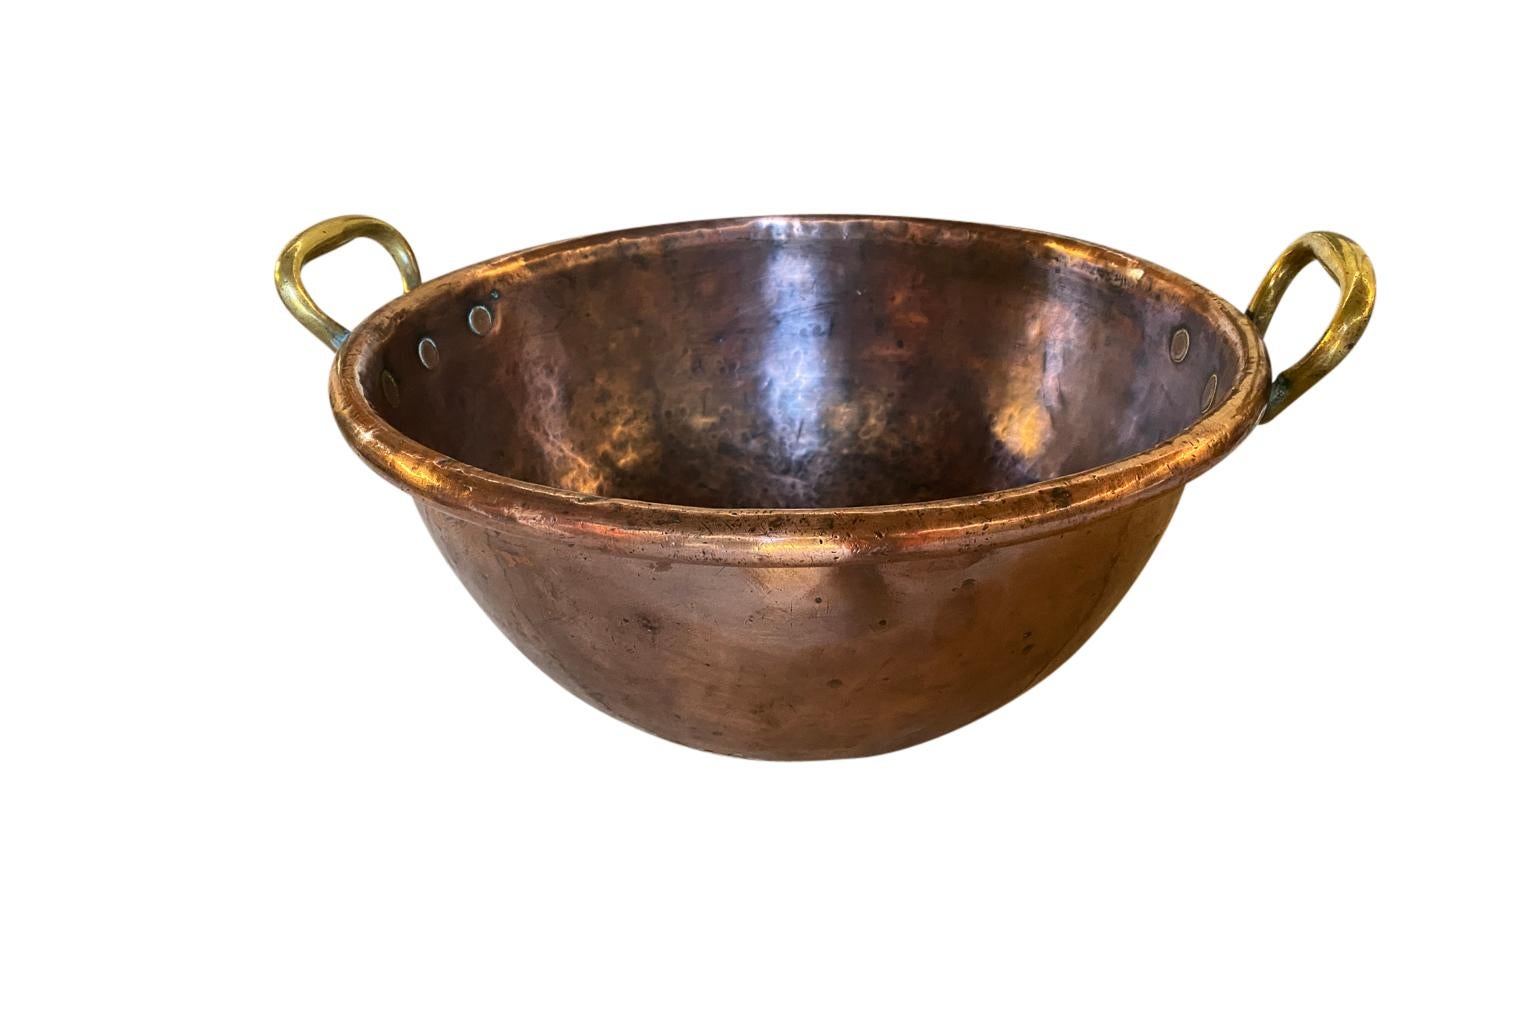 A very charming early 19th century Confectionery Pan from the Provence region of France. Very heavy guage and lovely patina. Perfect addition to any copper collection.